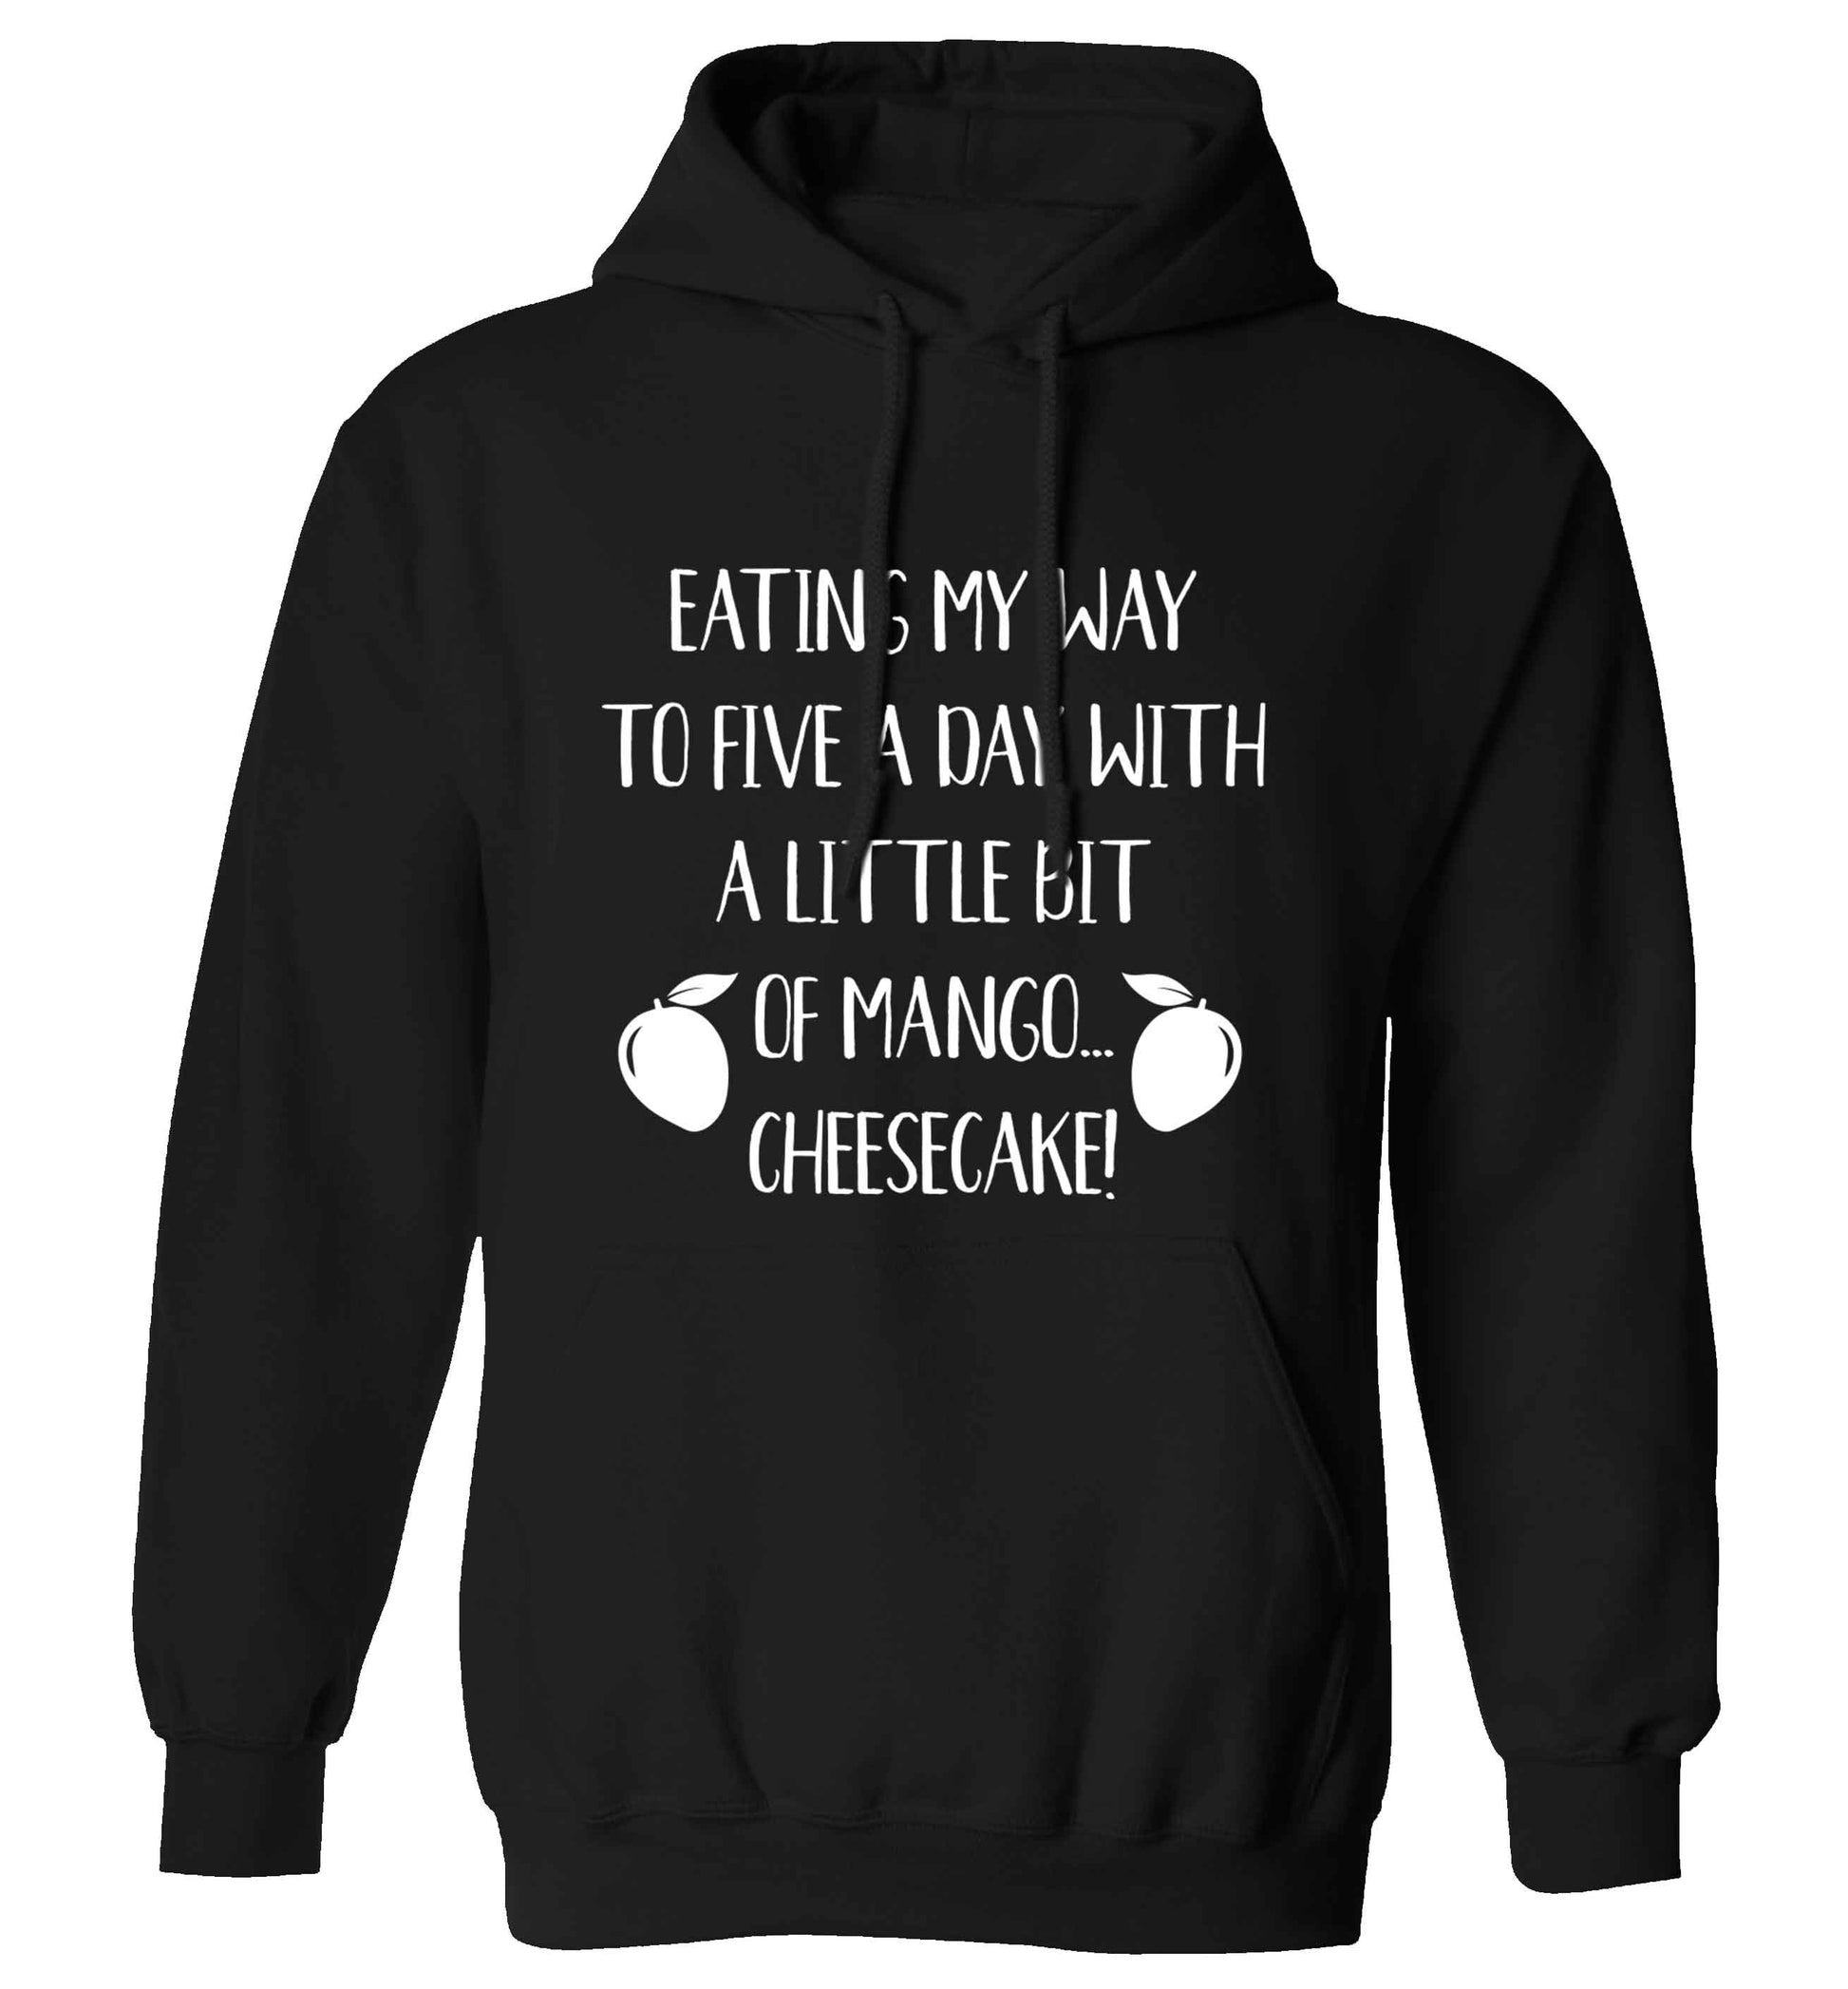 Eating my way to five a day with a little bit of mango cheesecake adults unisex black hoodie 2XL